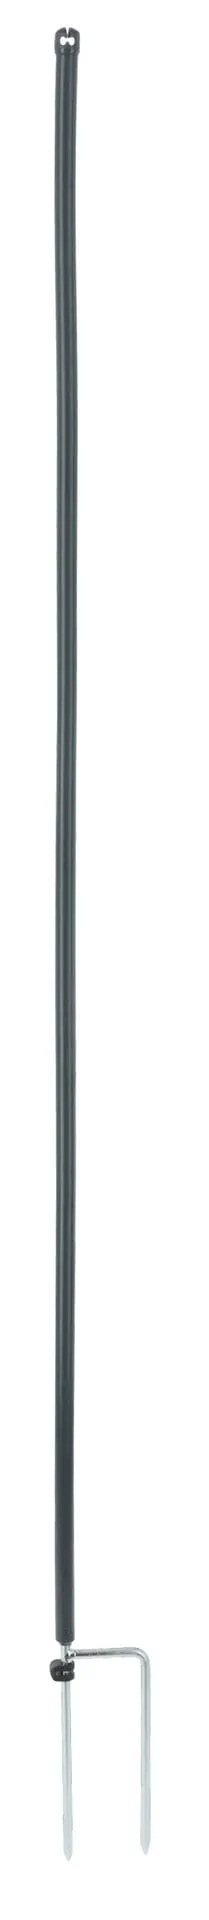 Spare Post grey PA 122 cm - Double Prong